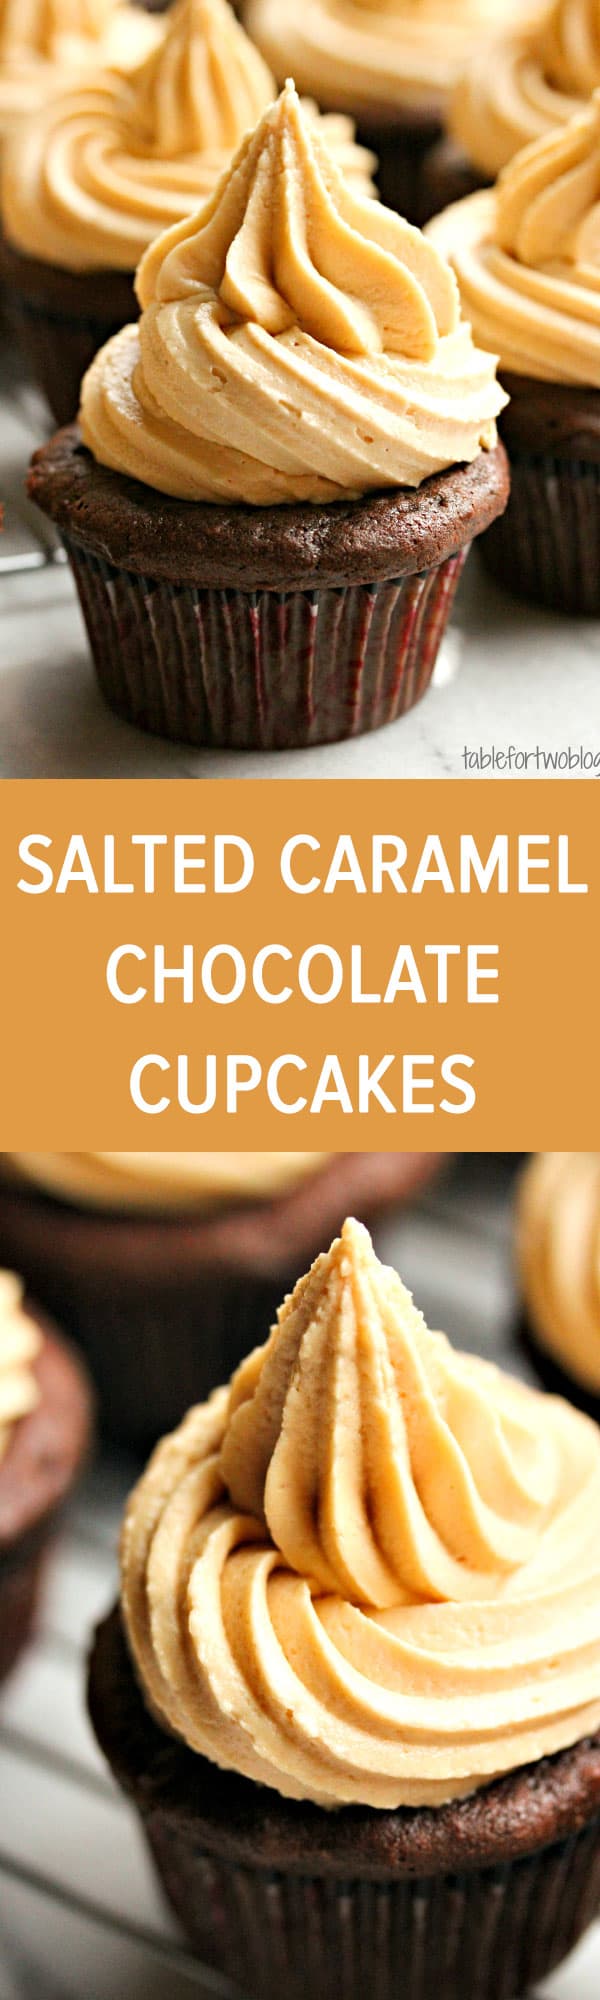 Salted caramel chocolate cupcakes-your favorite coffeehouse drink in cupcake form!